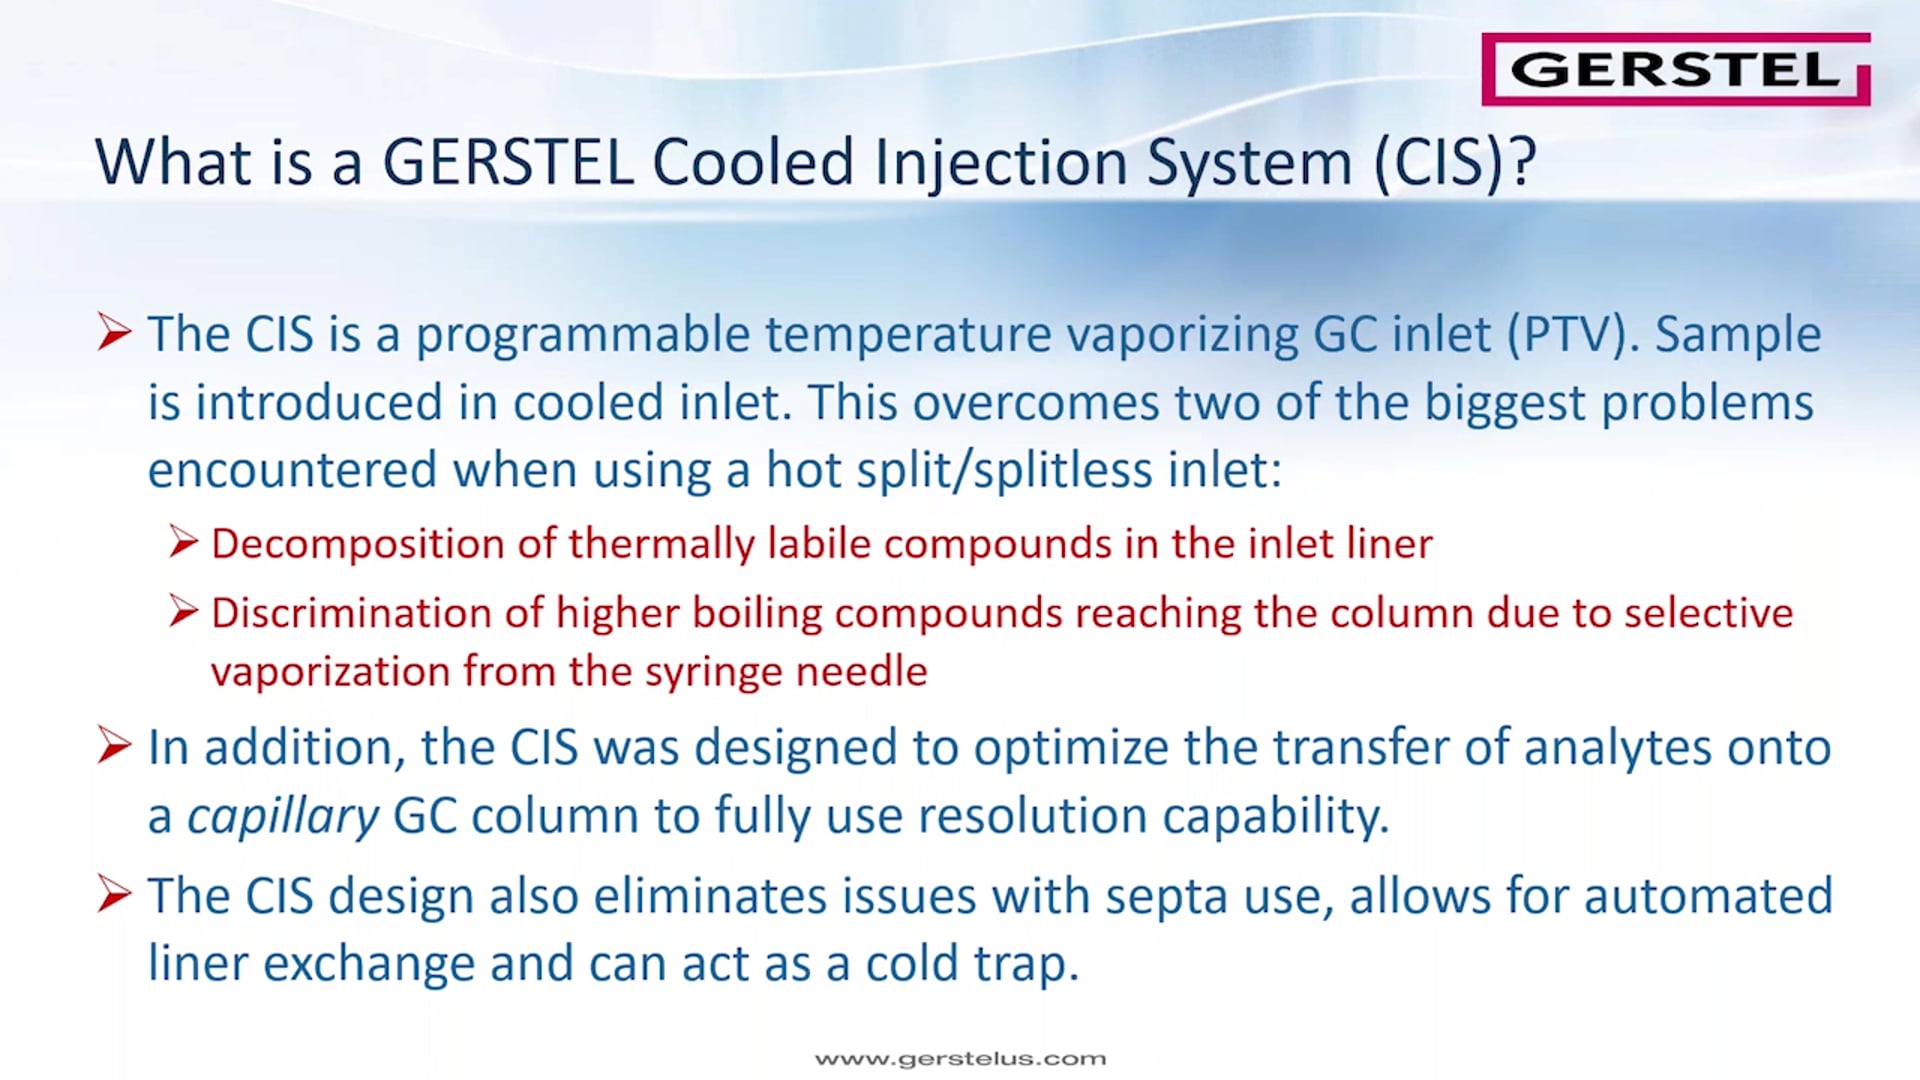 The GERSTEL Cooled Injection System (CIS) Universal Inlet for GC